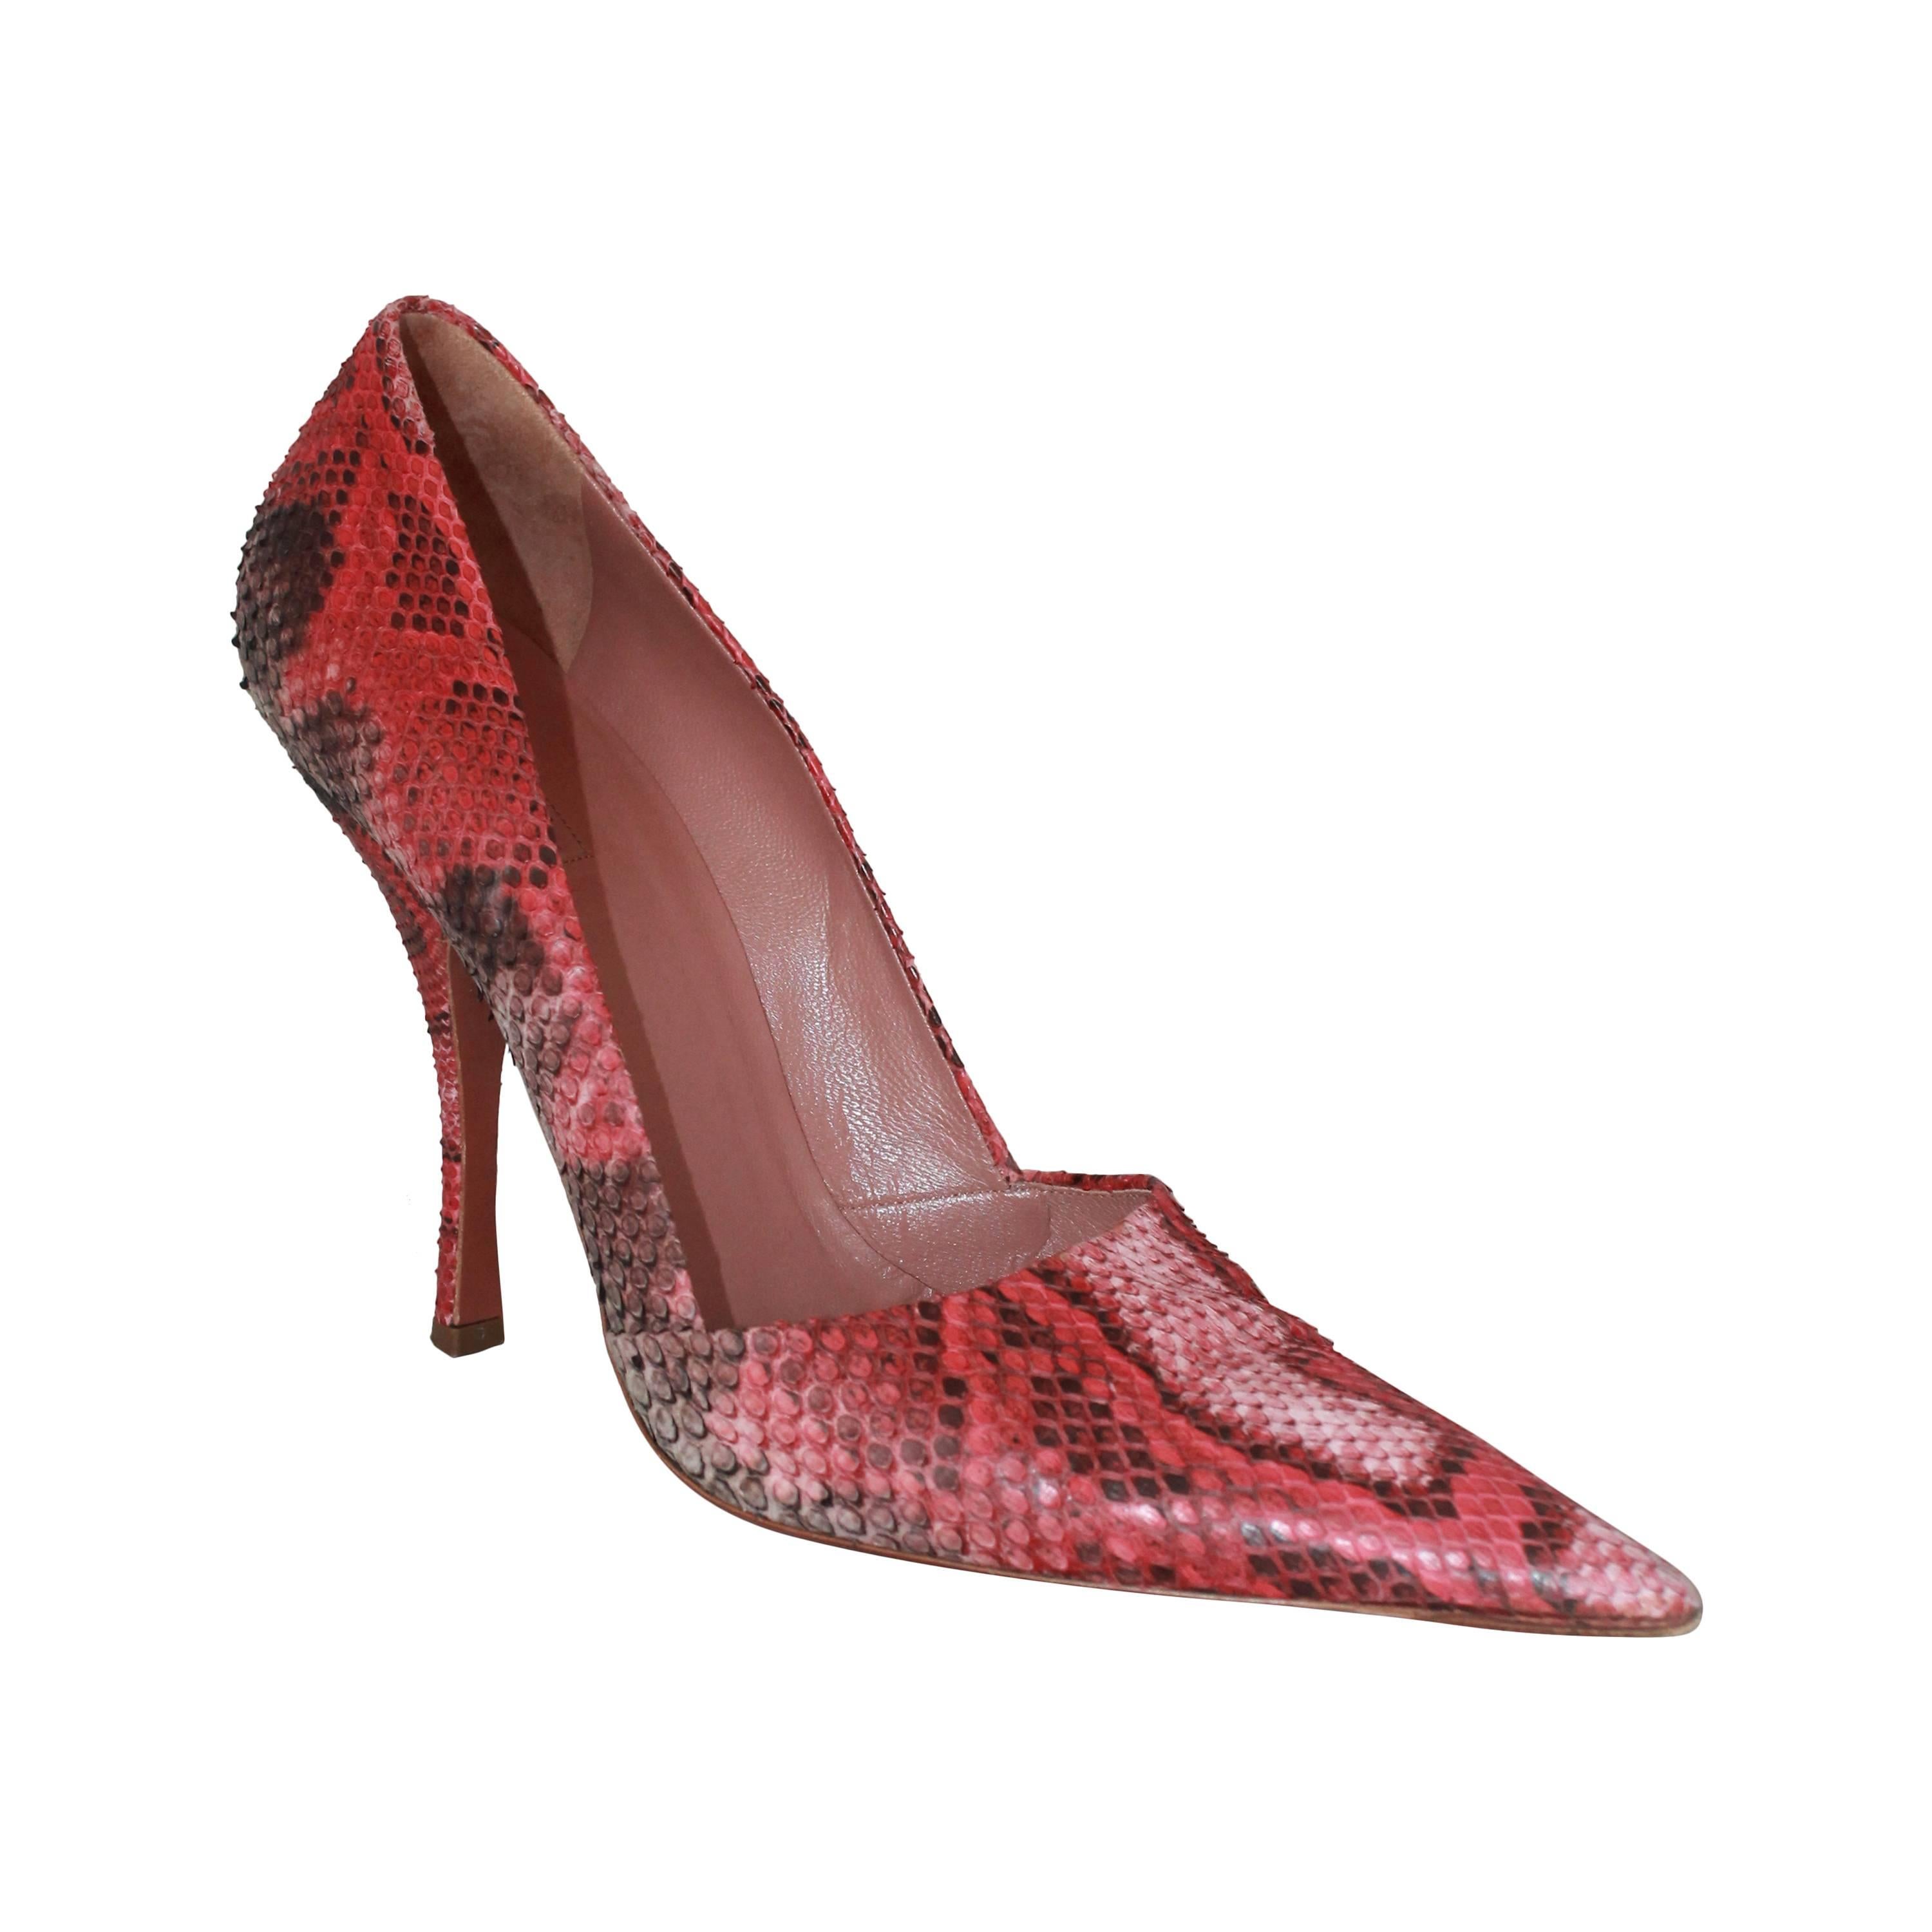 Alaia Red & Black Snake Skin Pointed Toe Pumps - 41